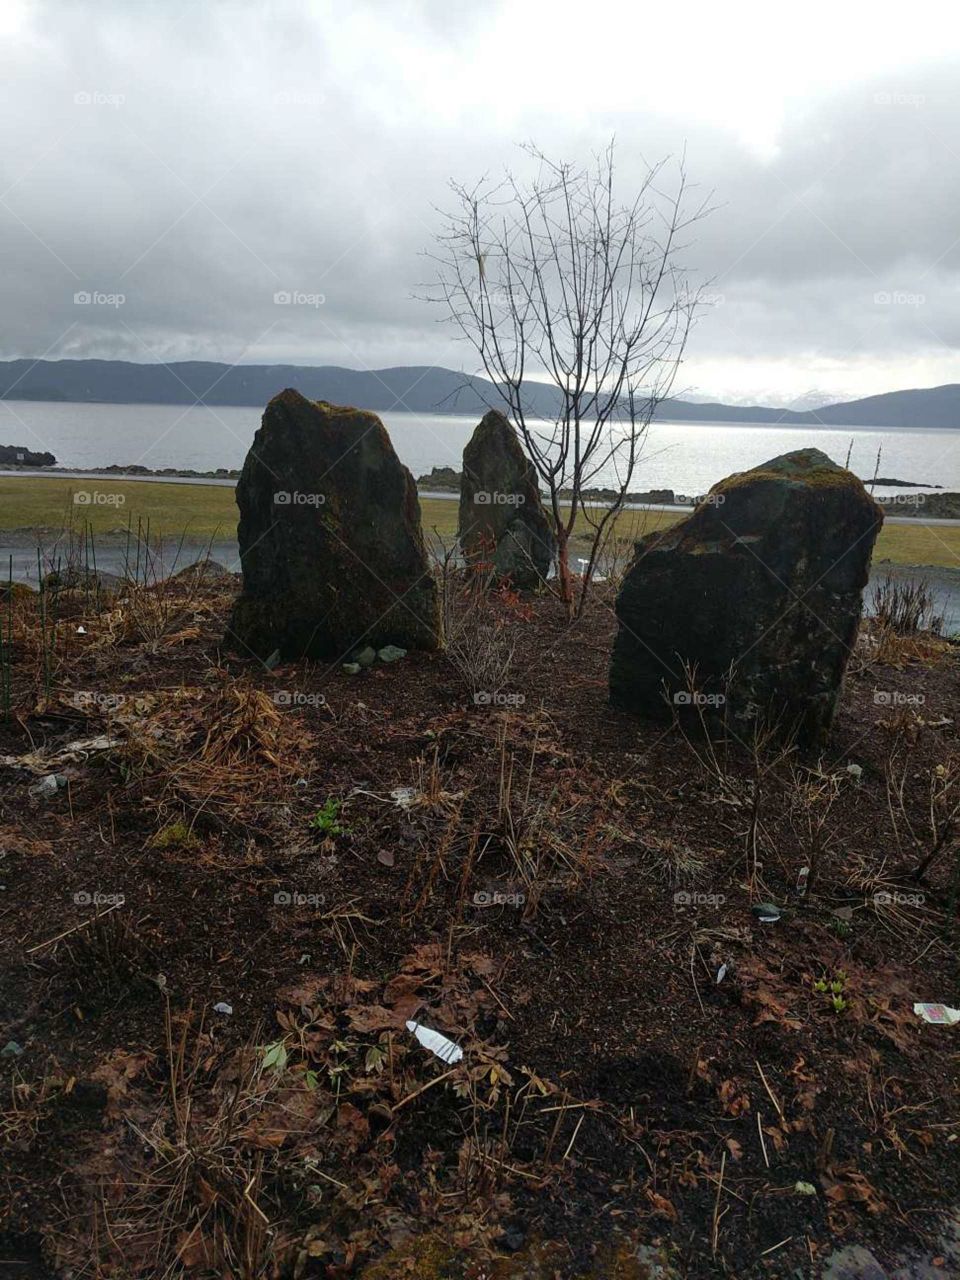 creepy but cool miniature Stonehenge at the mouth of the bay just before the shrine to St. Teresa